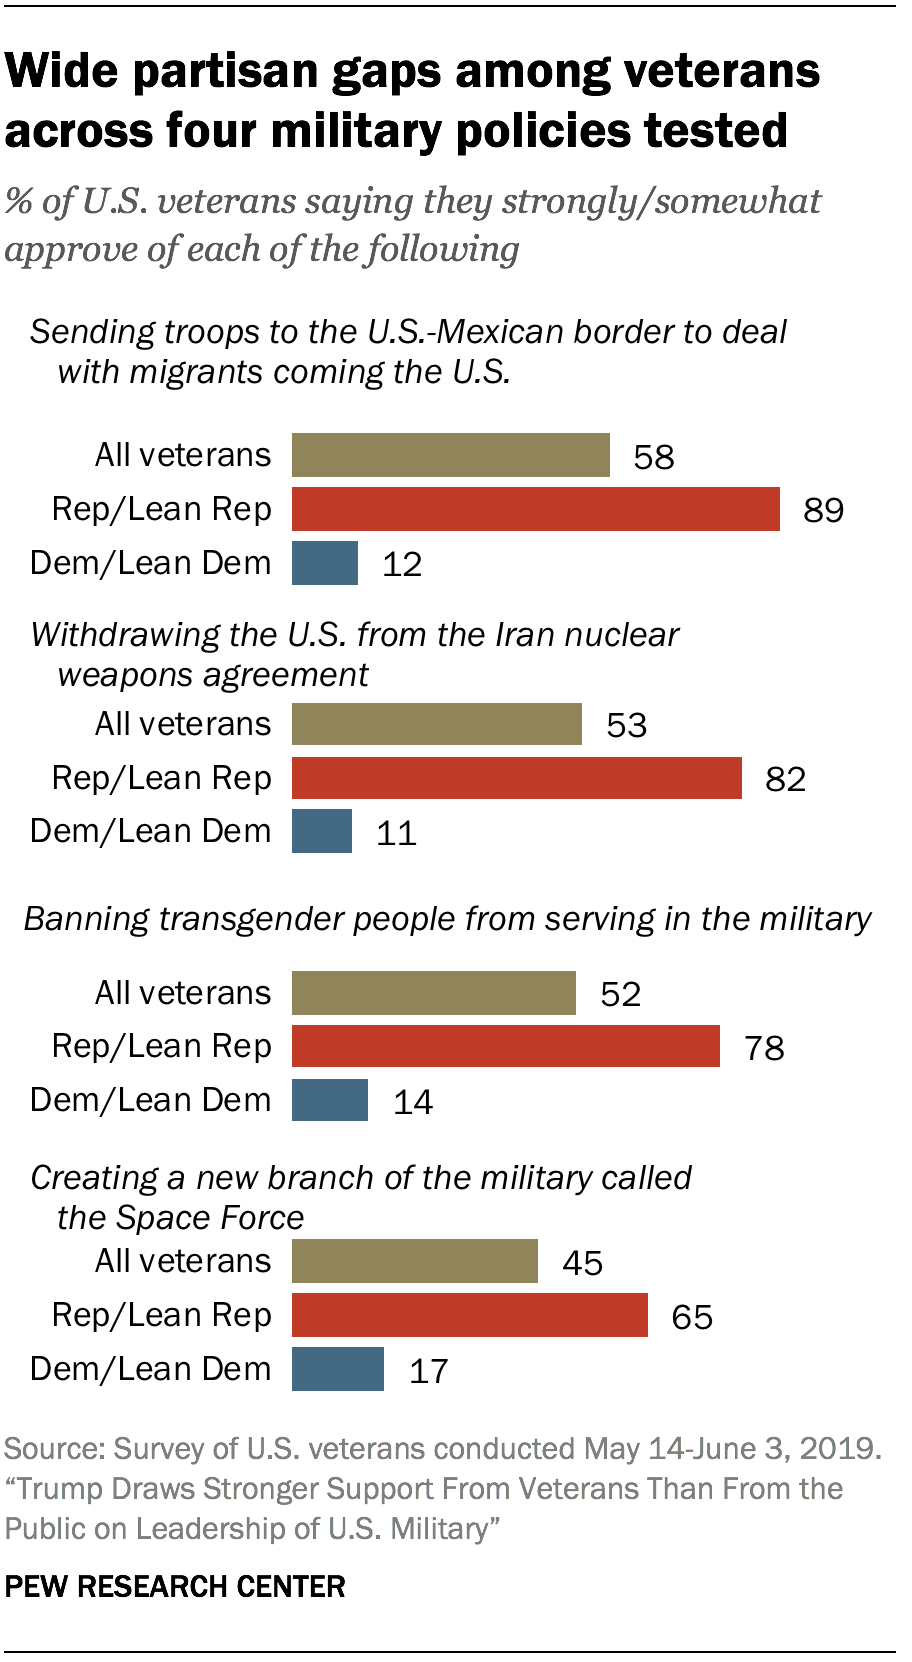 Wide partisan gaps among veterans across four military policies tested